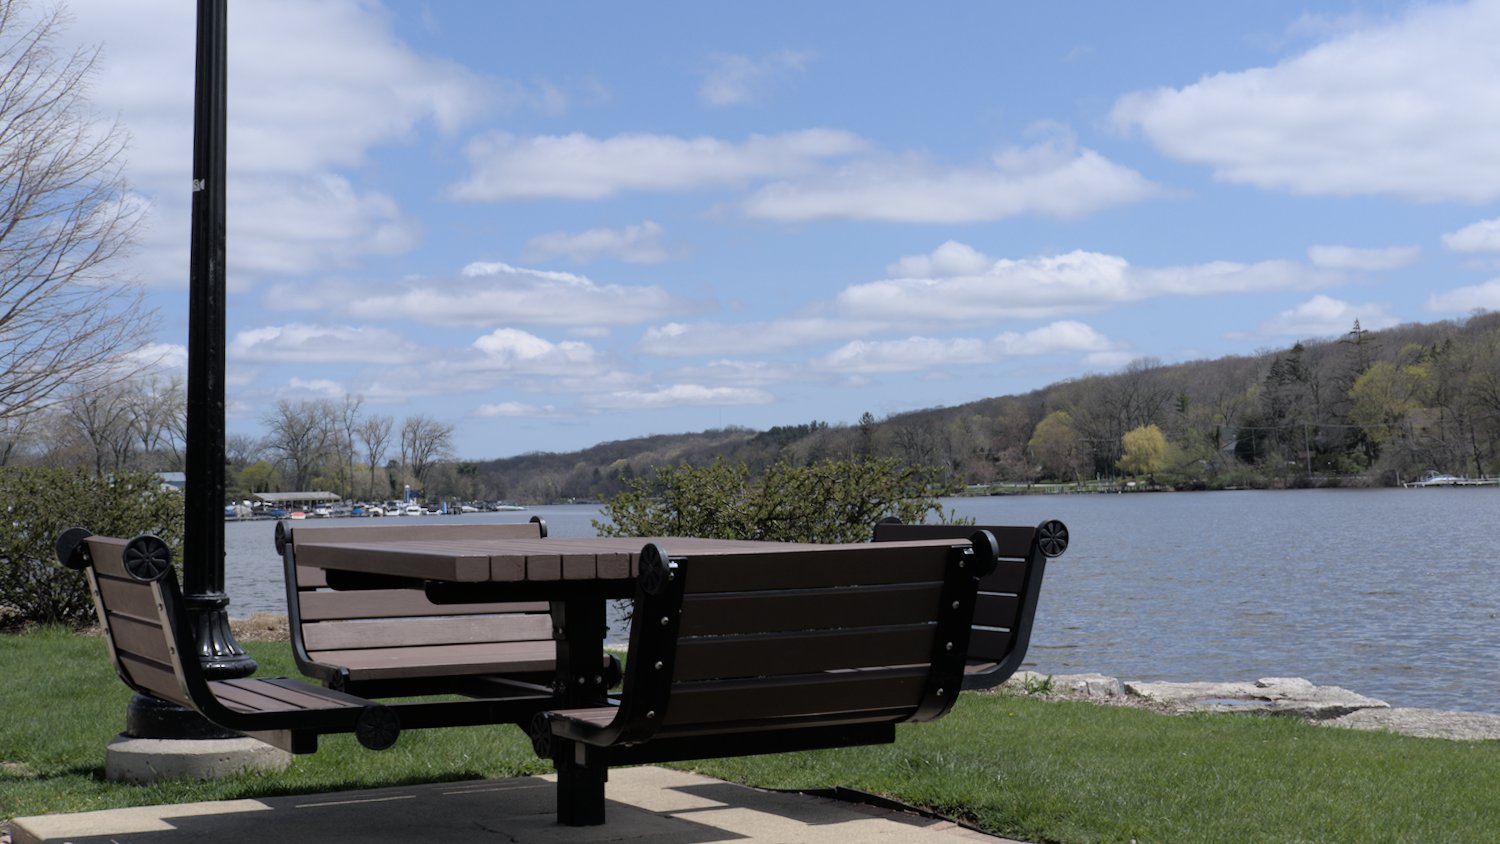 Built-in picnic tables and chairs along the river.